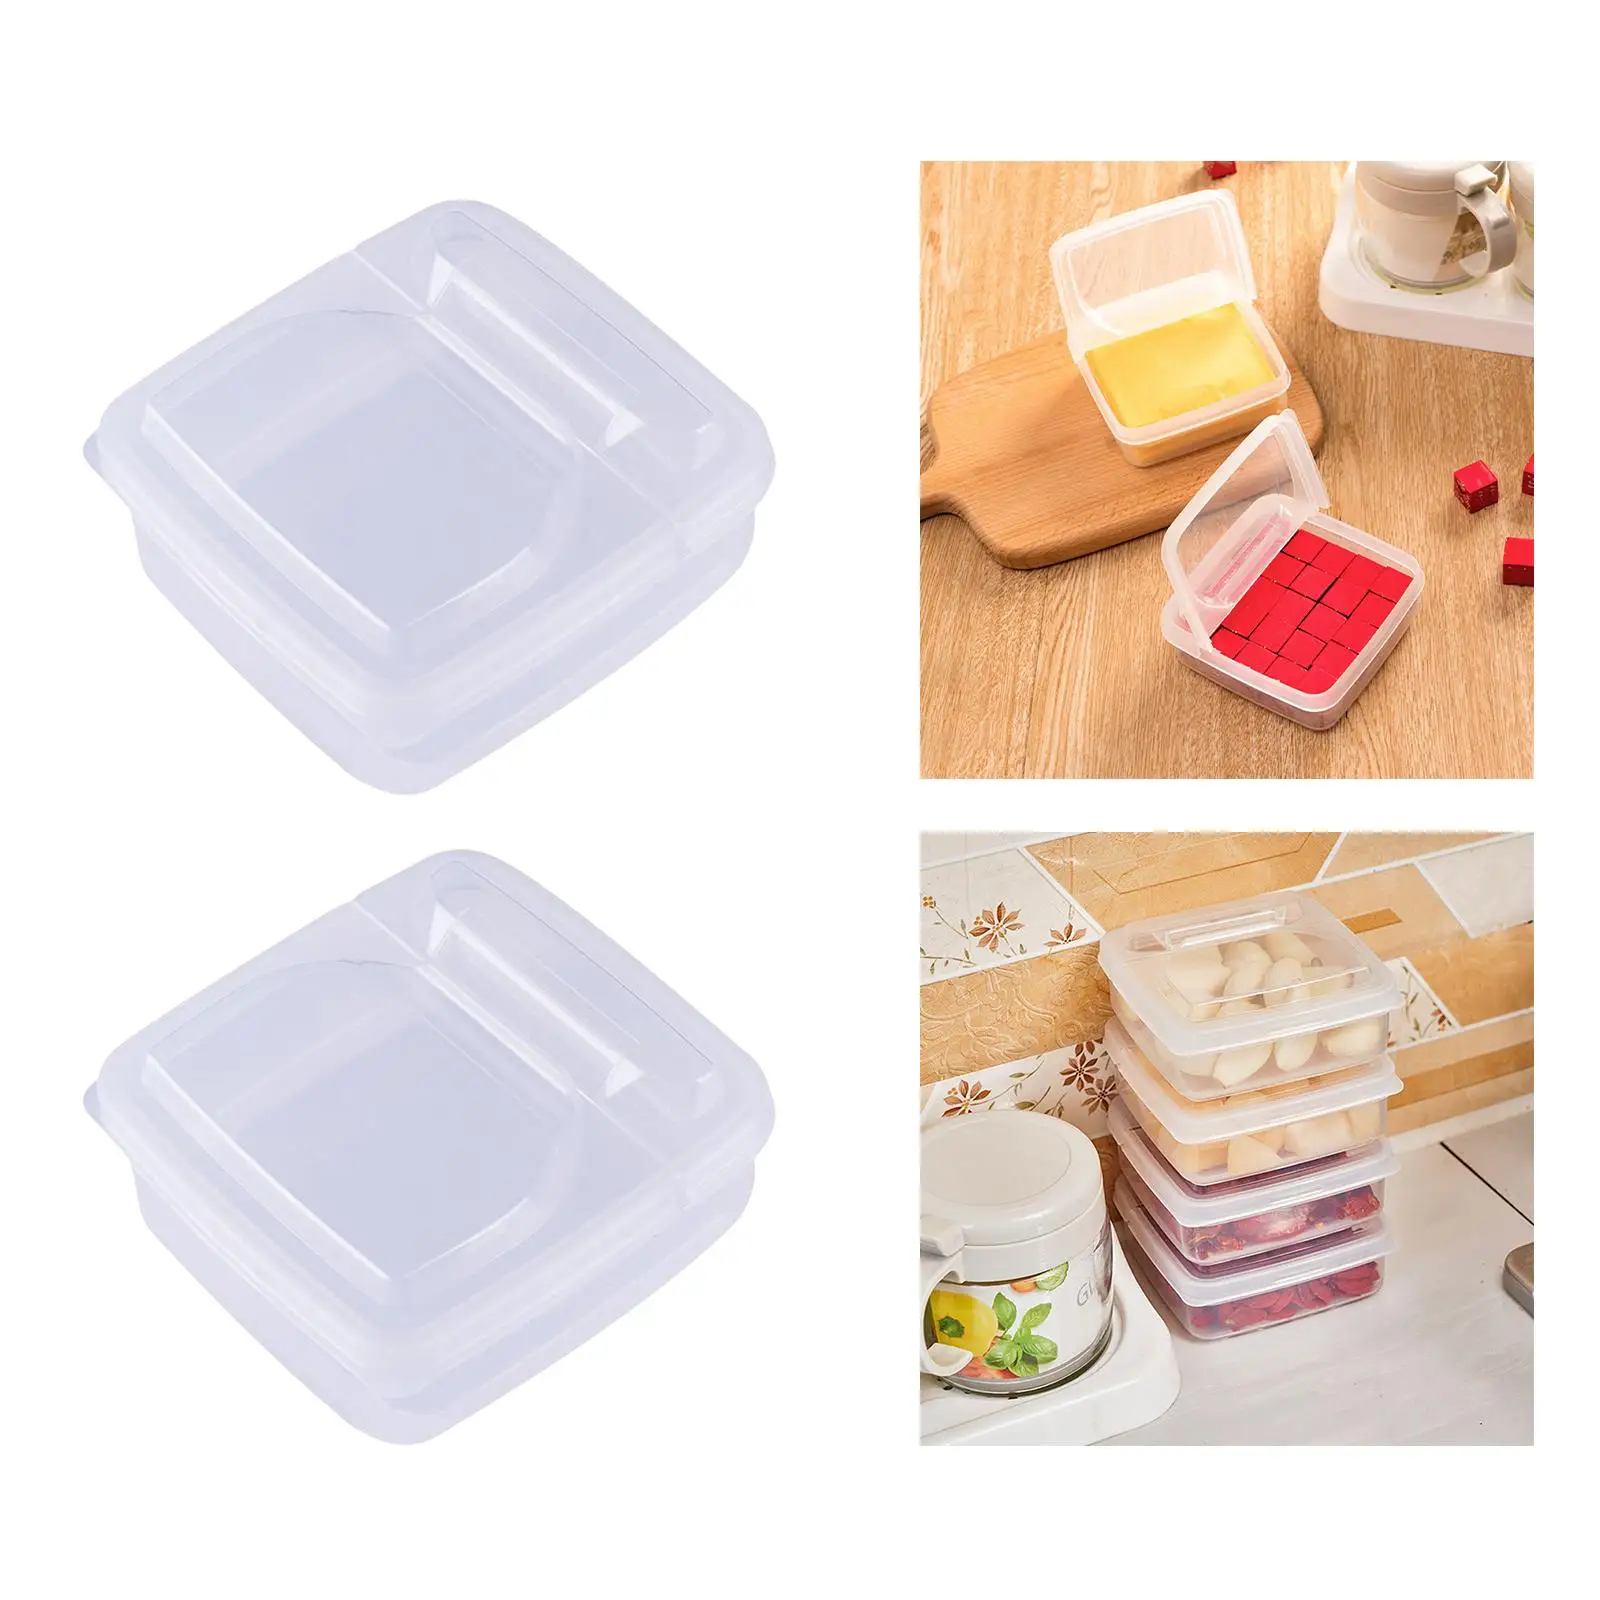 2 Pieces Compact Refrigerator Food Container Freezer Drawers Bins Food Grade